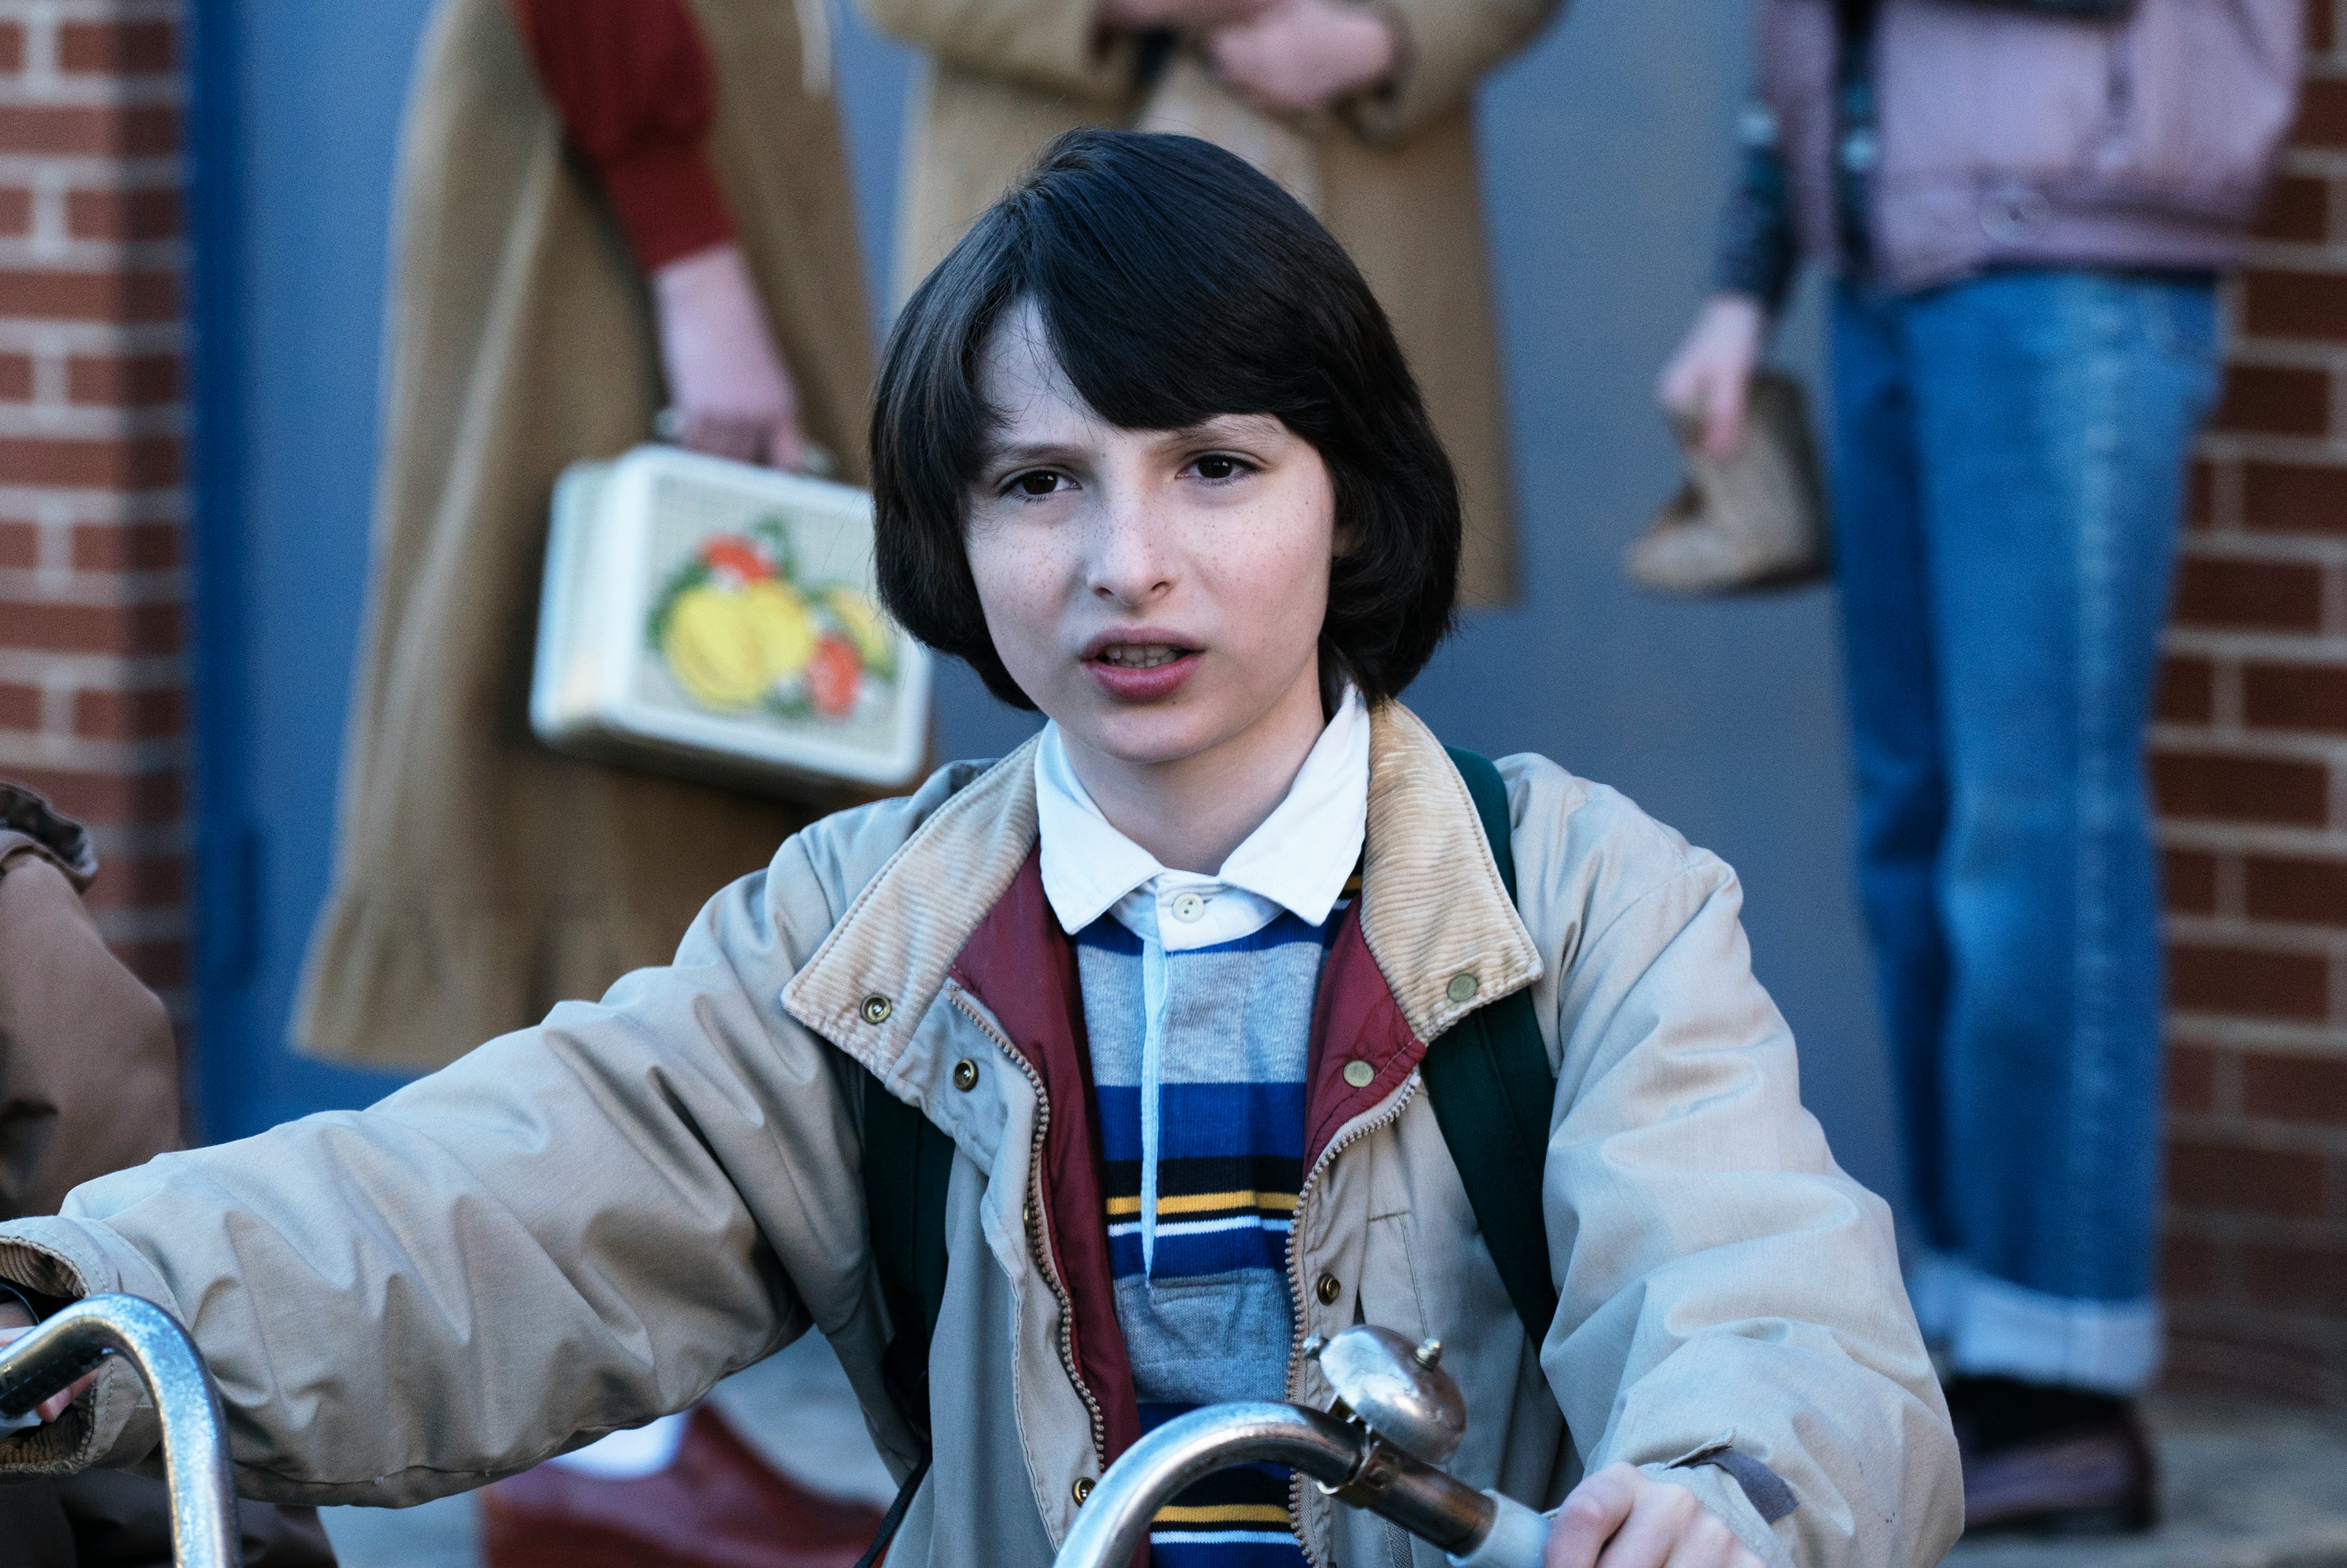 Stranger Things Season 3 Casting Call Reveals A Possible Spoilers